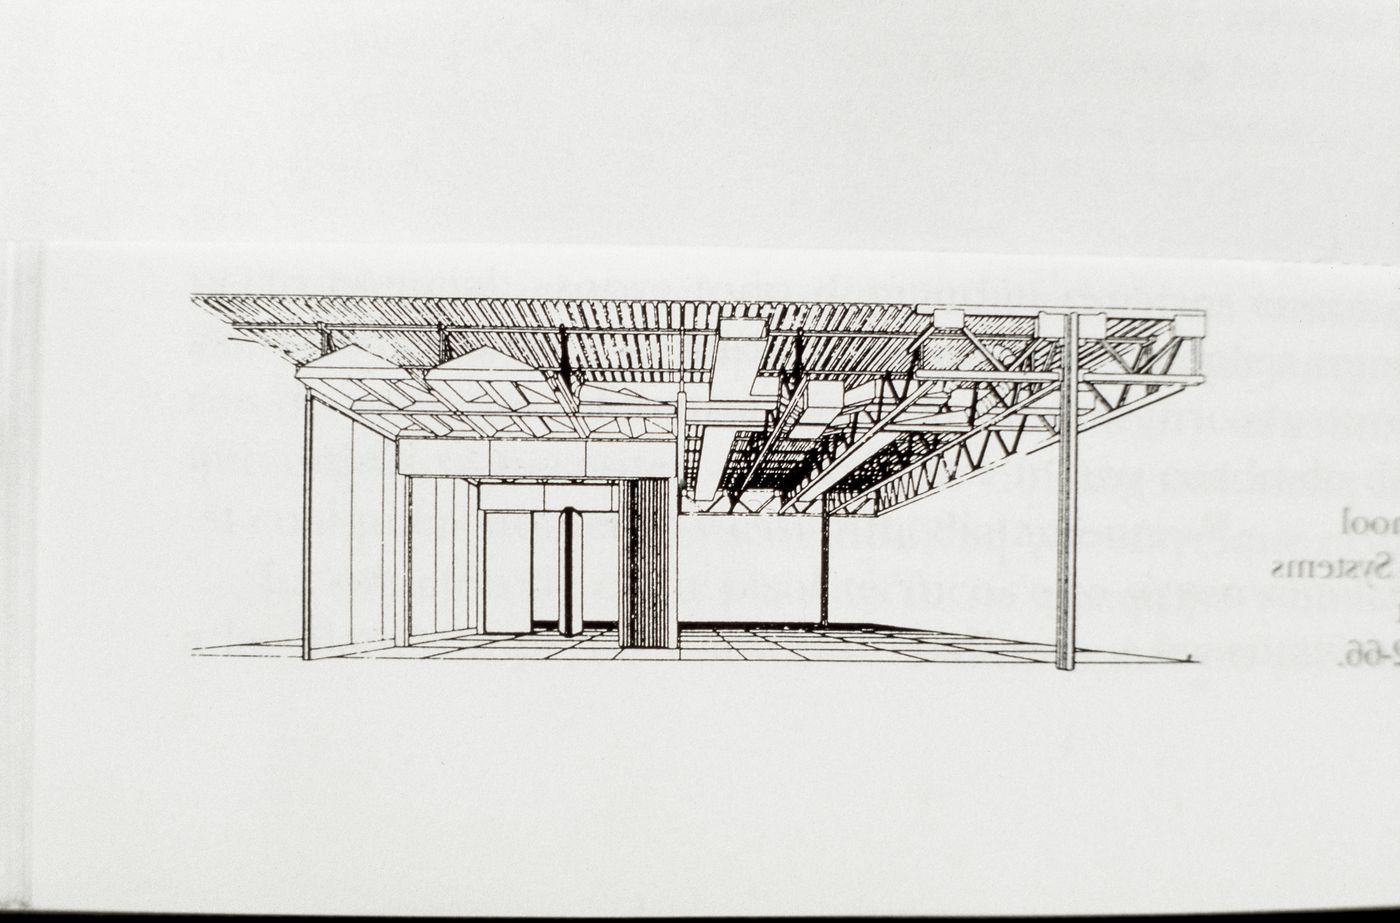 Slide of a drawing for American School Construction Systems Development, SCSD, by Ezra Ehrenkrantz